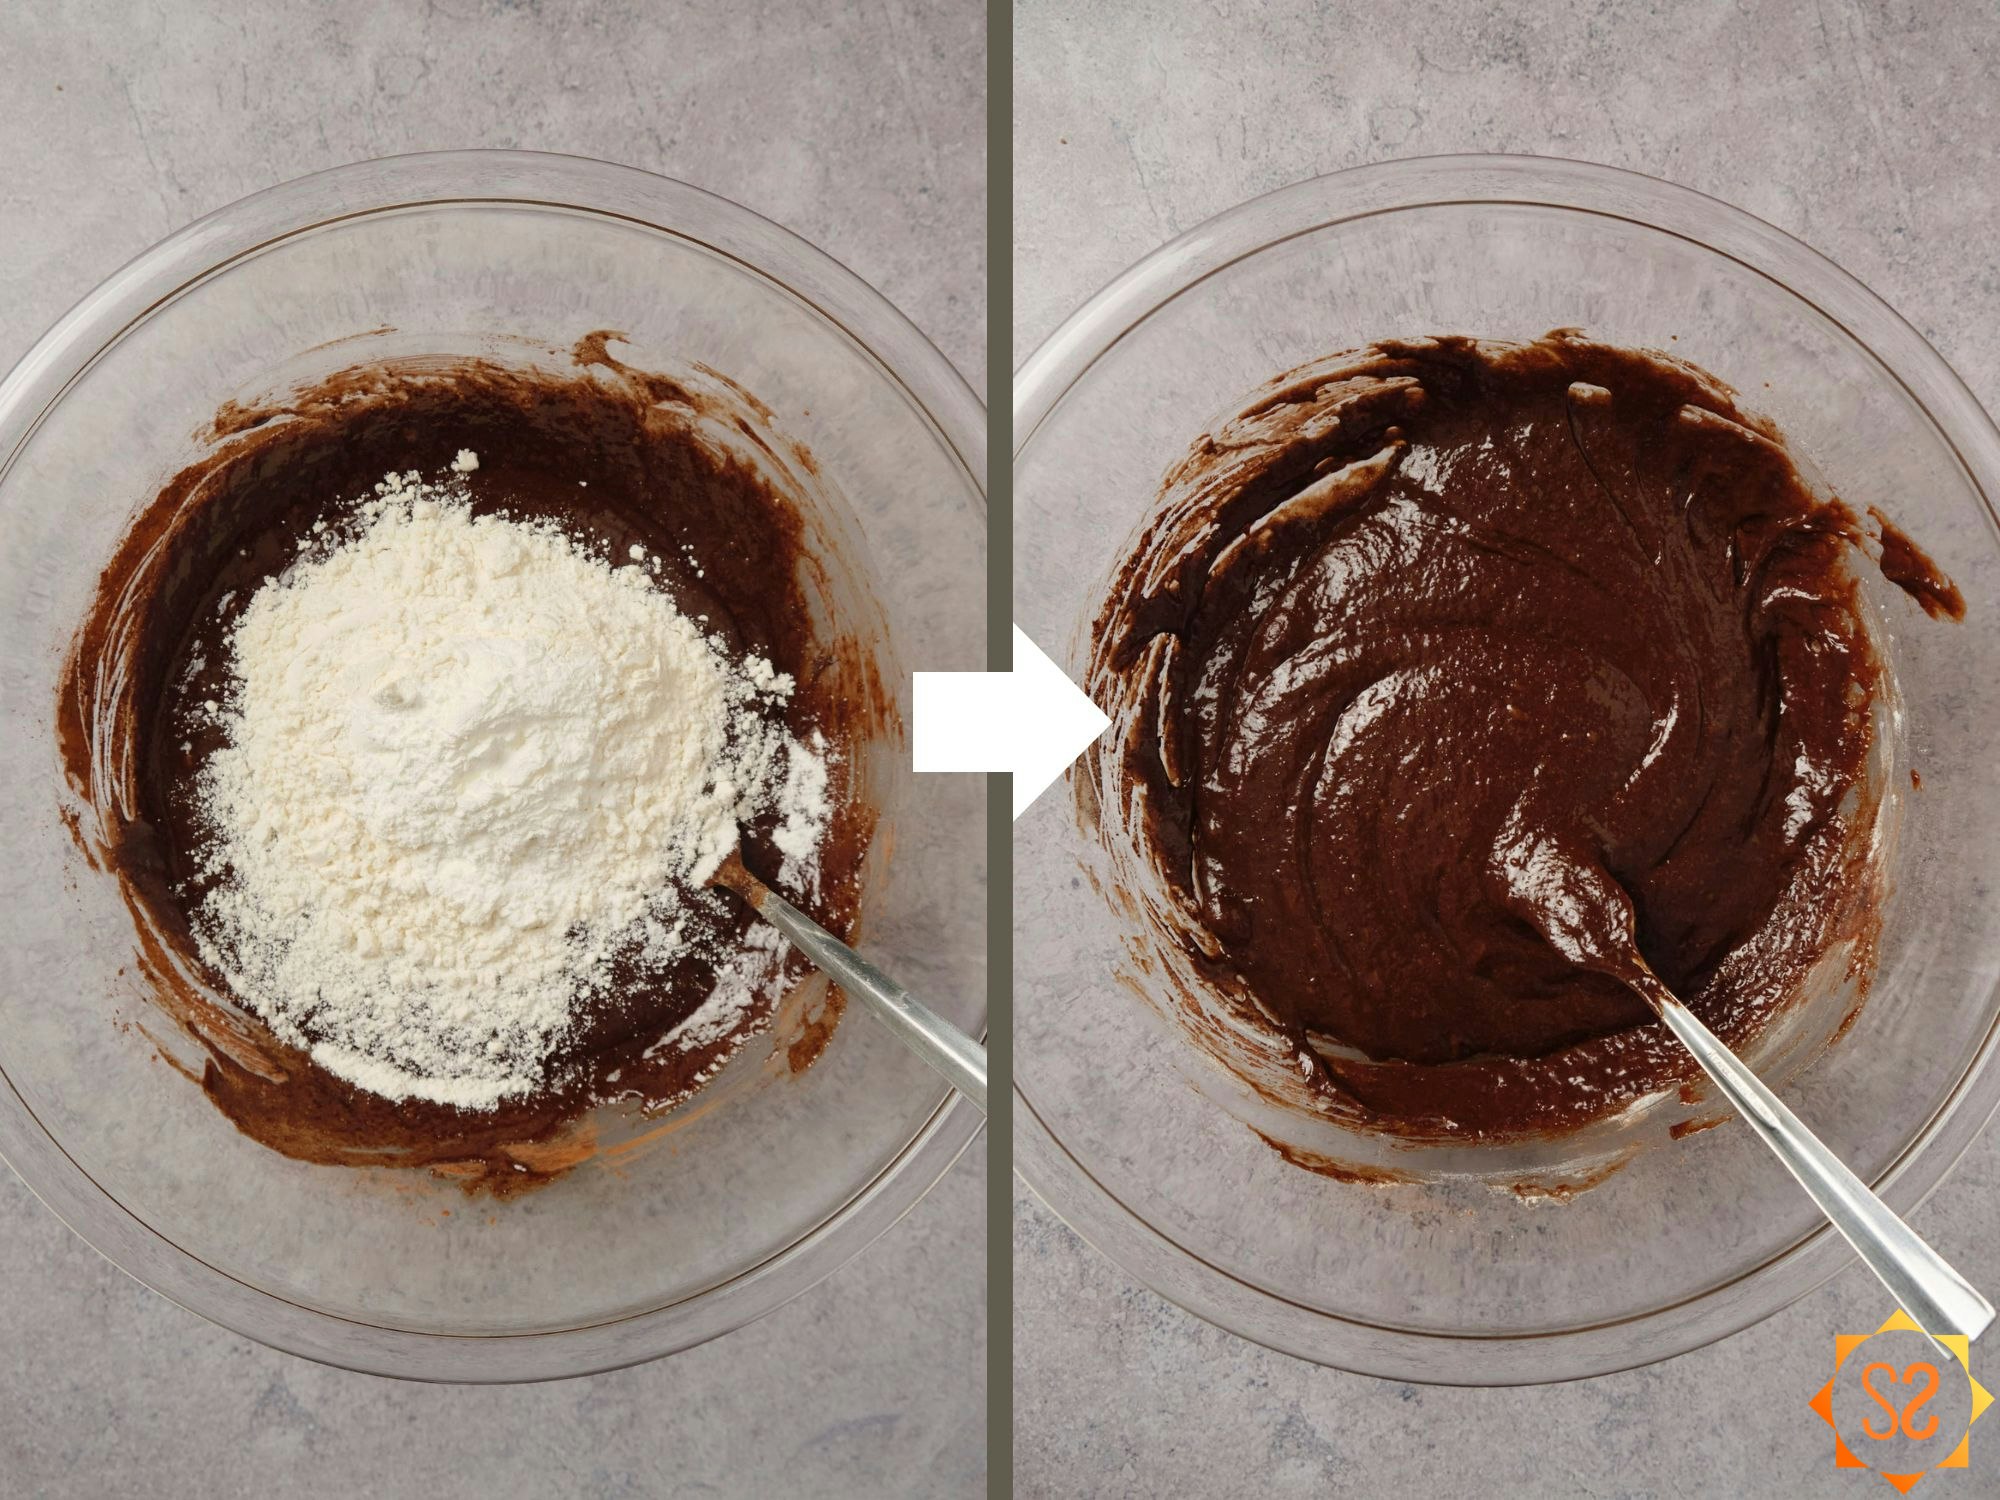 Adding dry ingredients to the batter (left: before mixing, right: after mixing).